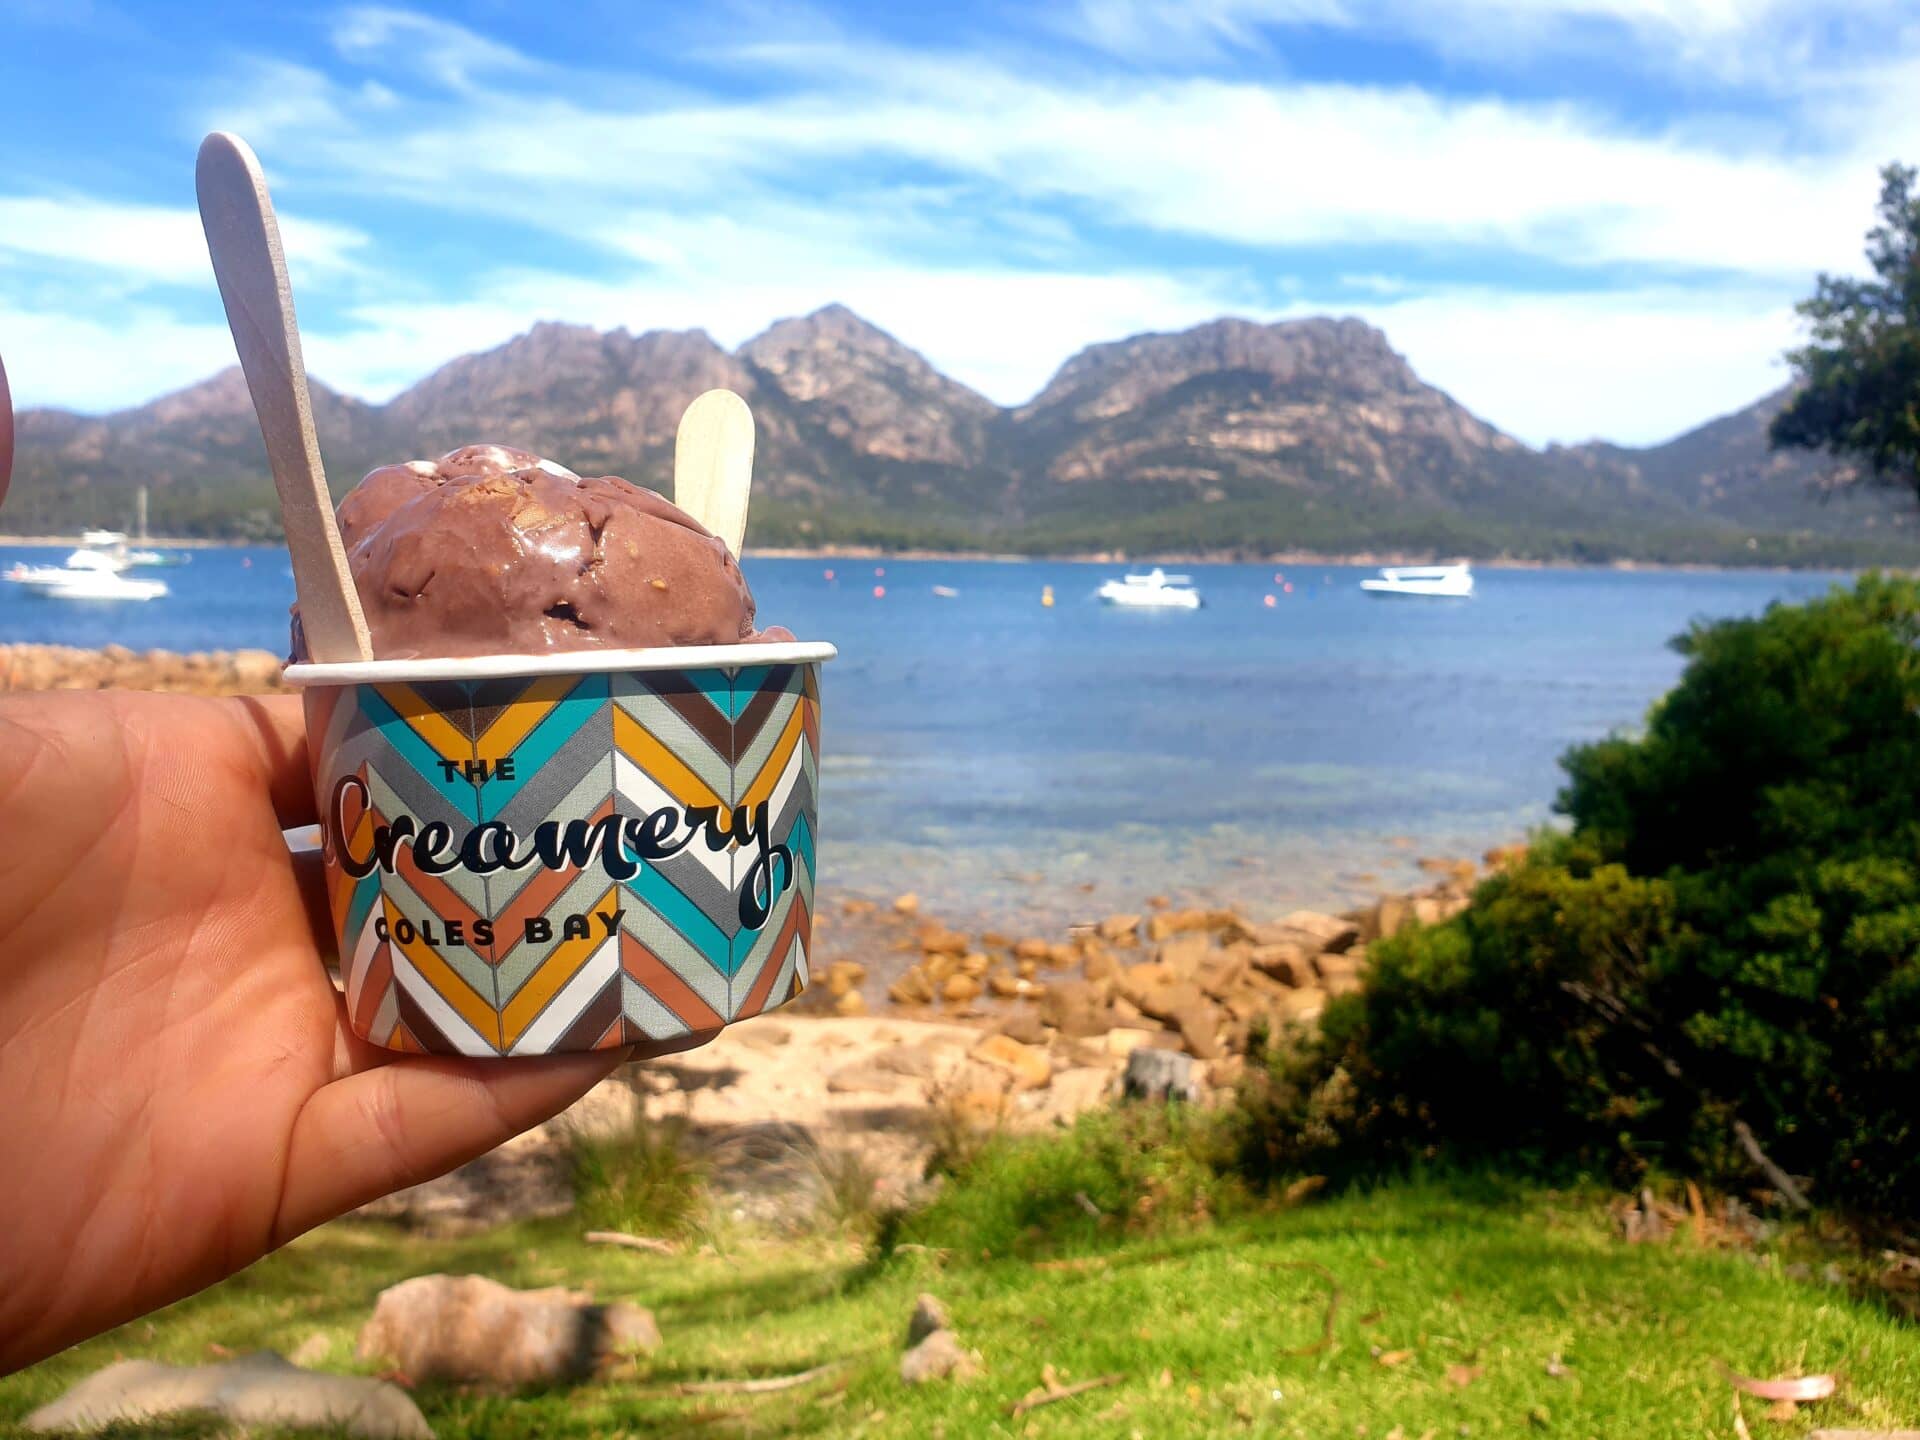 Mountain Hikes-ice cream in coles bay views of Mt amos